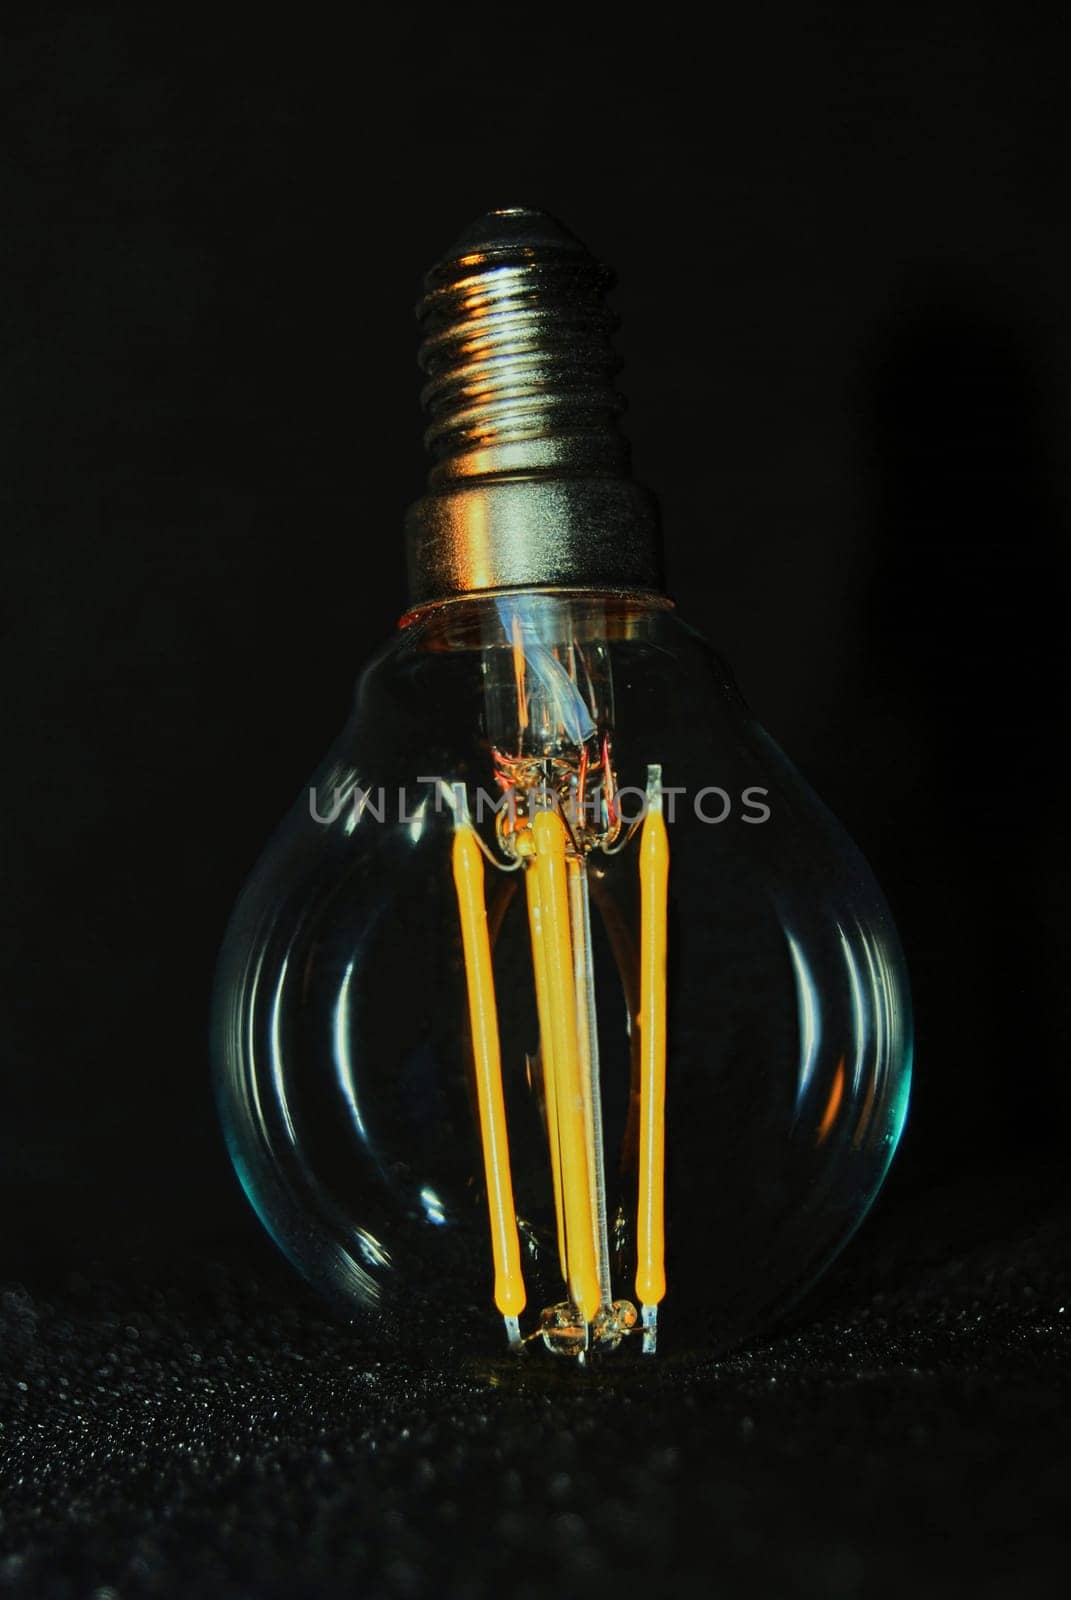 Decorative light bulb with yellow spirals.